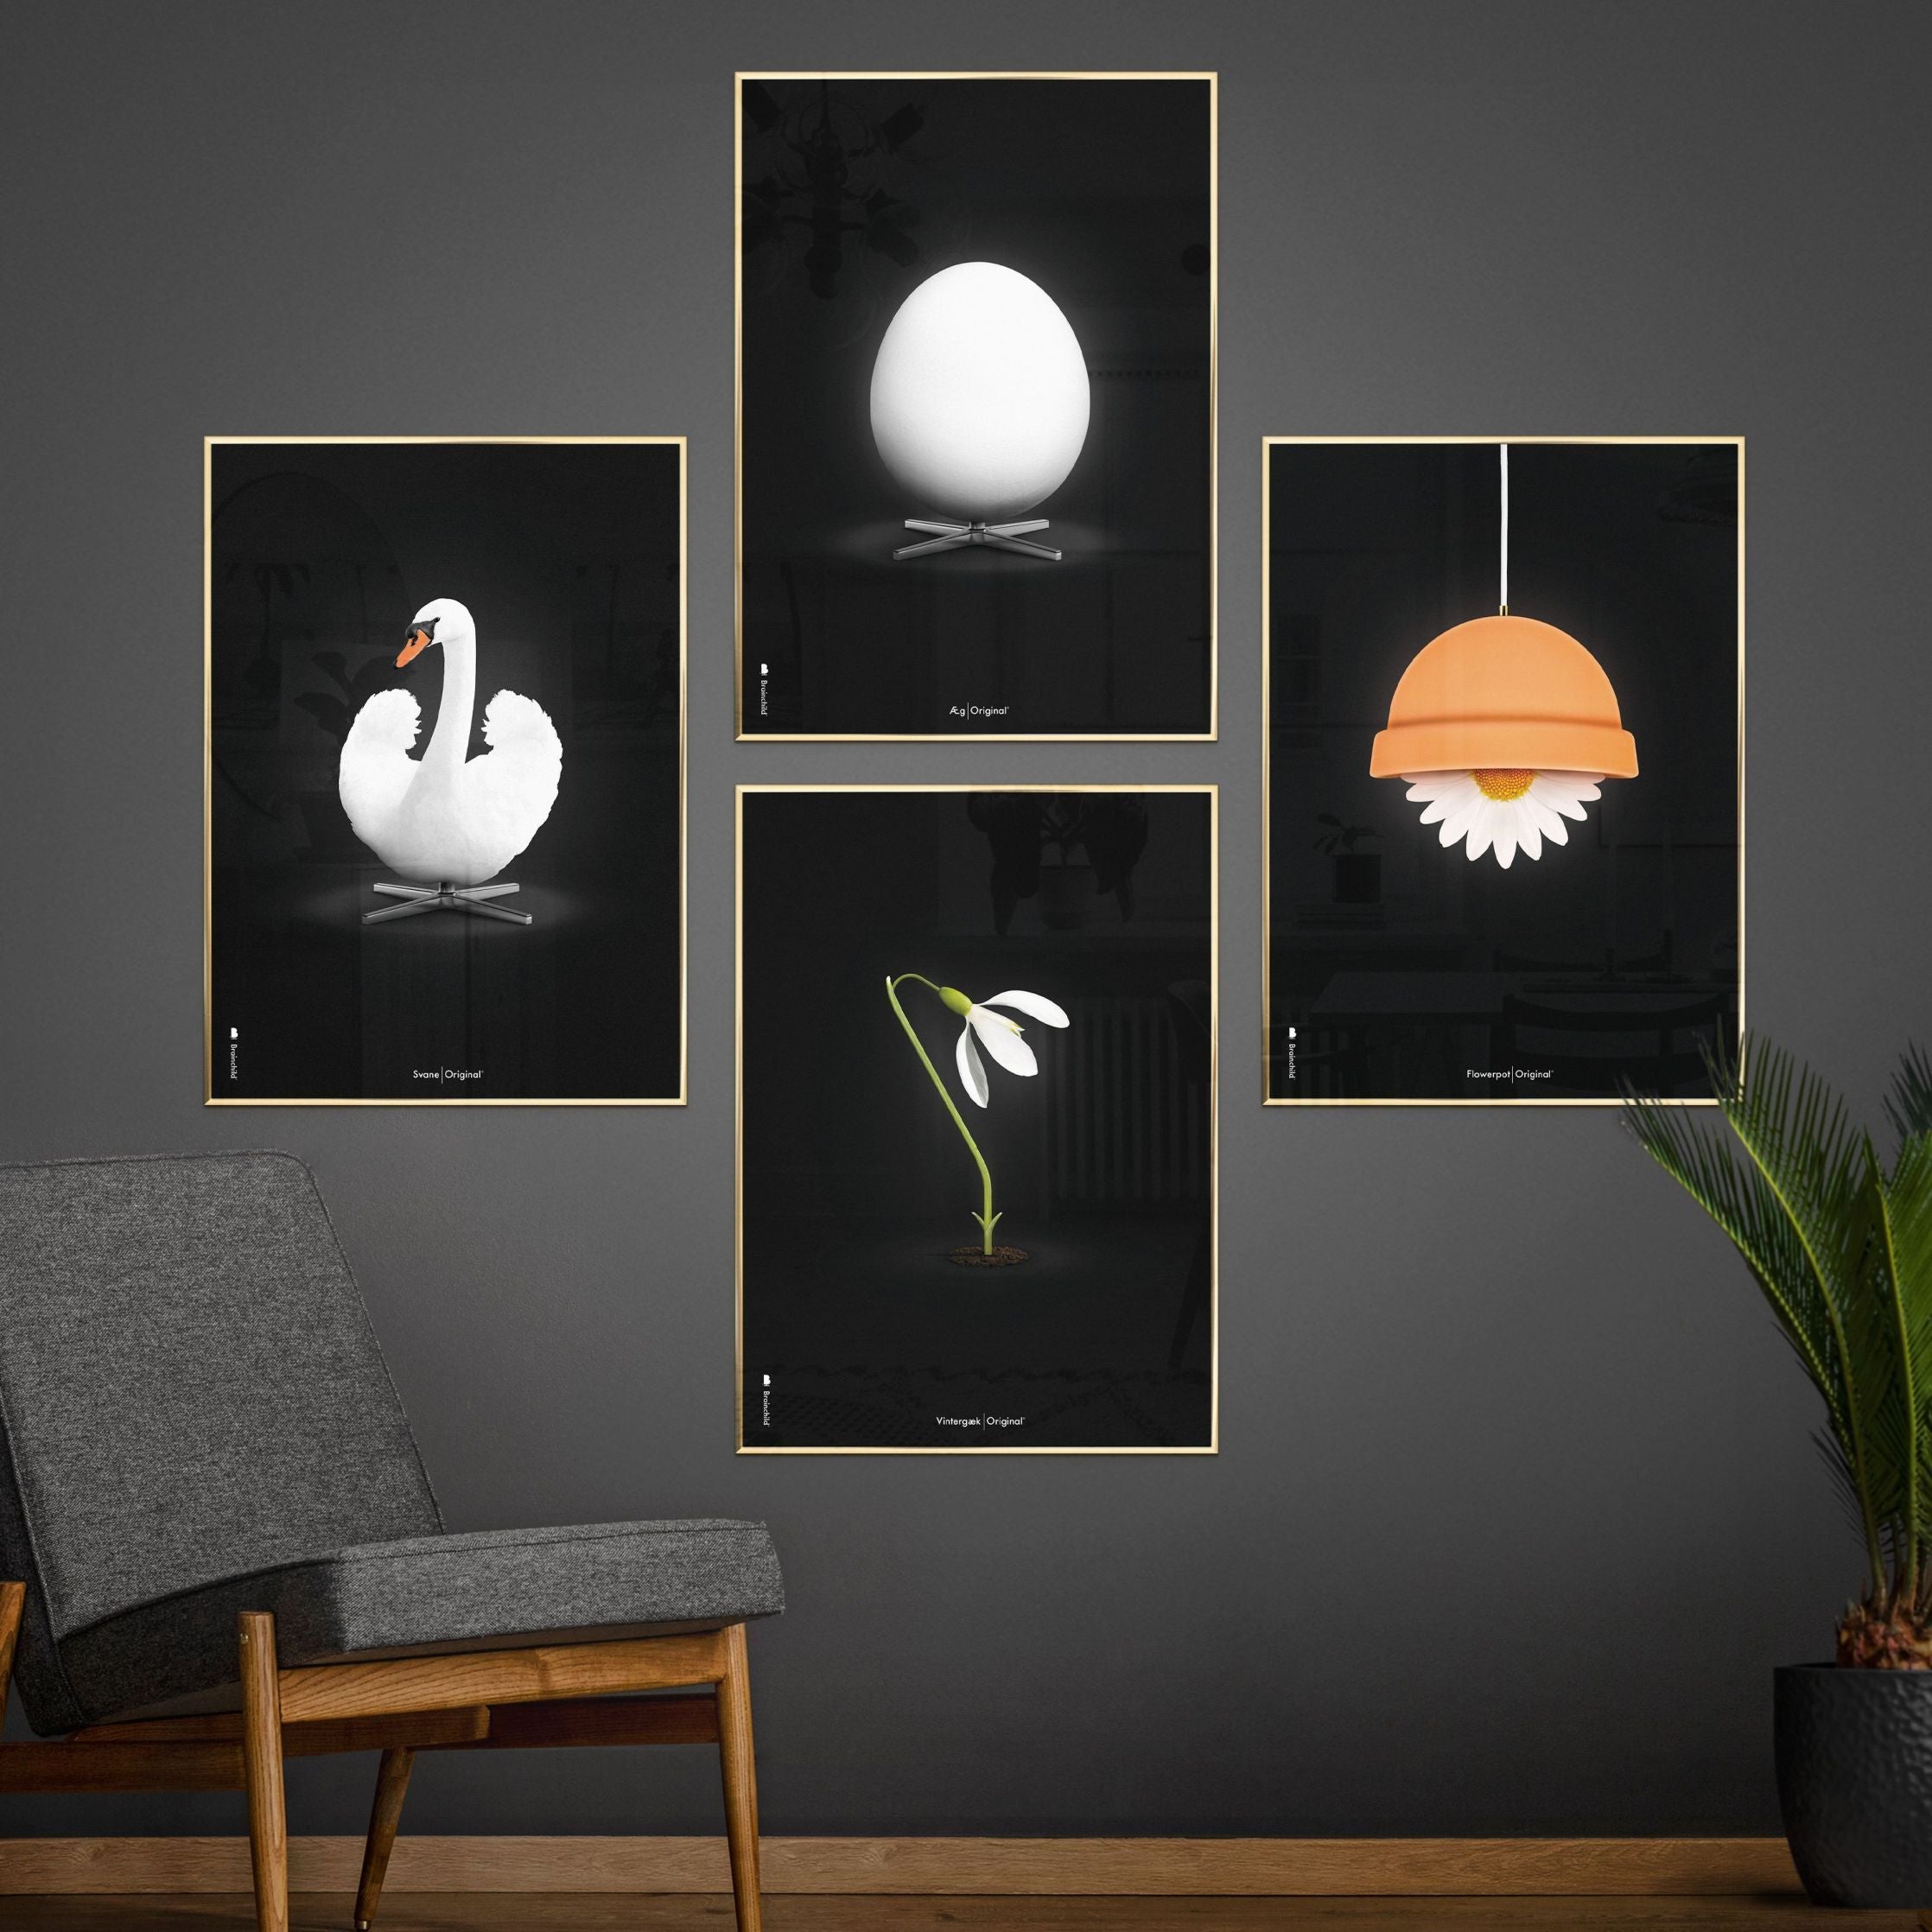 Brainchild Swan Classic Poster, Frame In Black Lacquered Wood 30x40 Cm, White/White Background